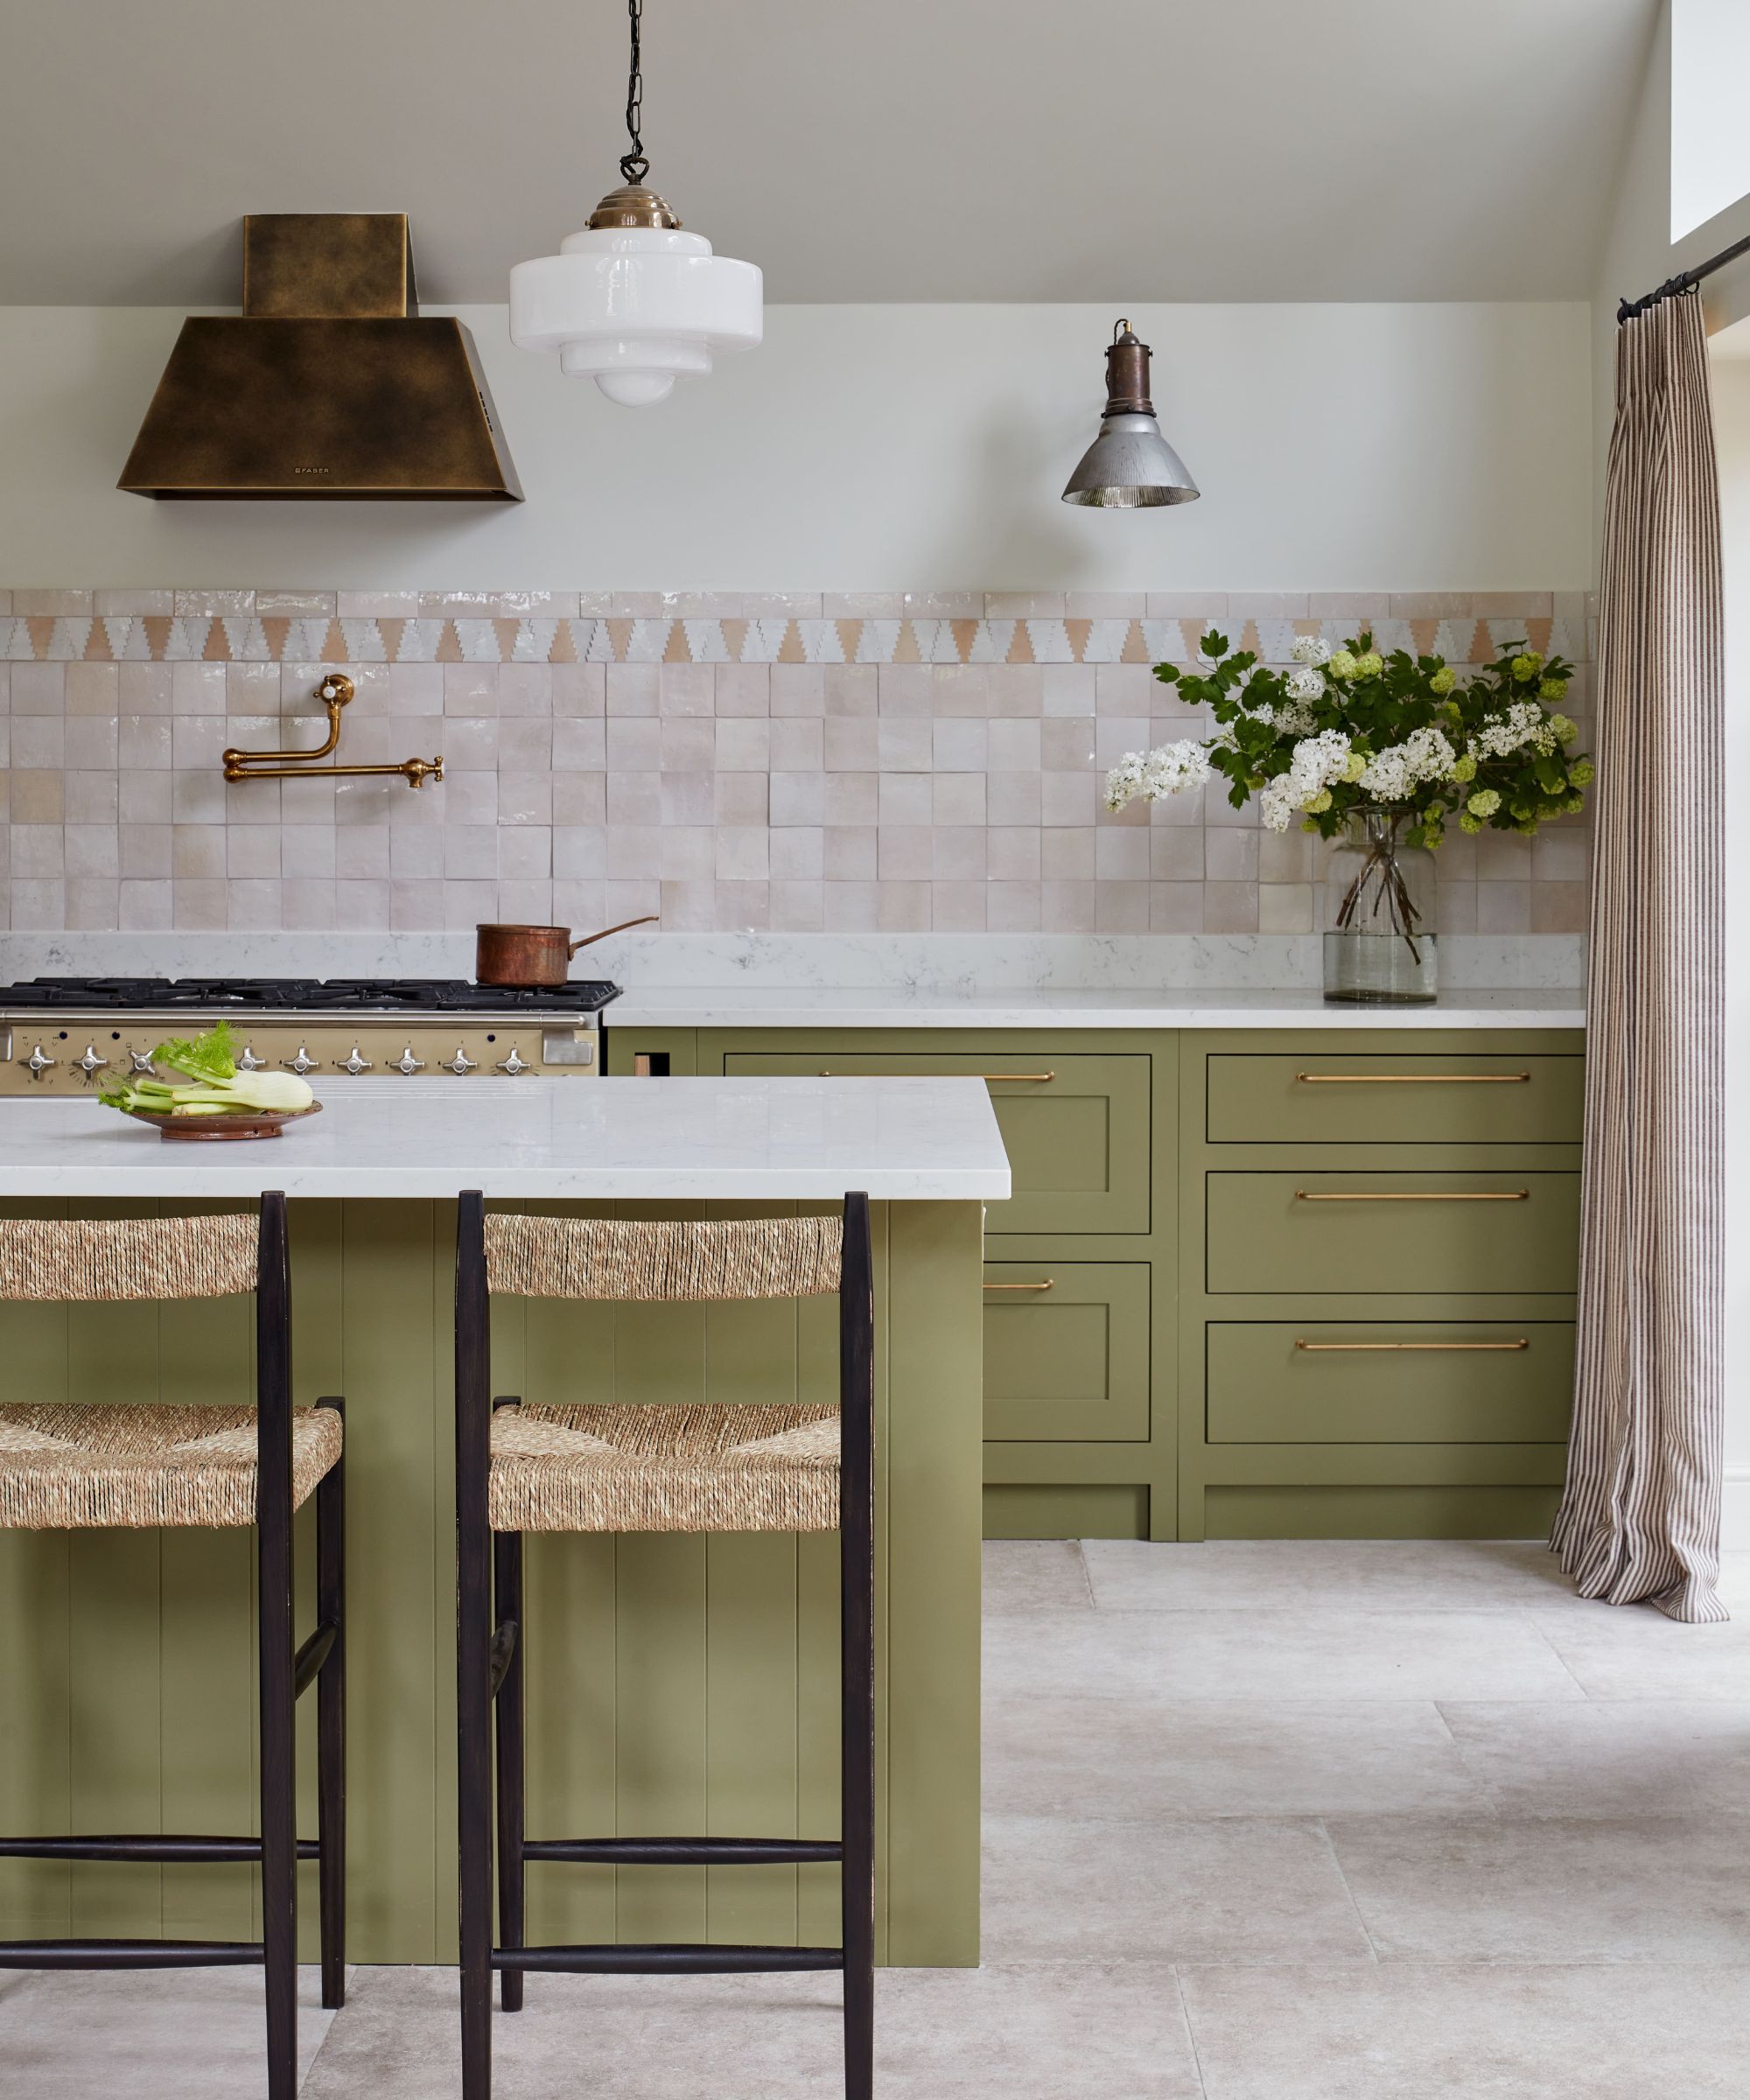 green and pink kitchen with vintage lighting and rattan bar stools at the island